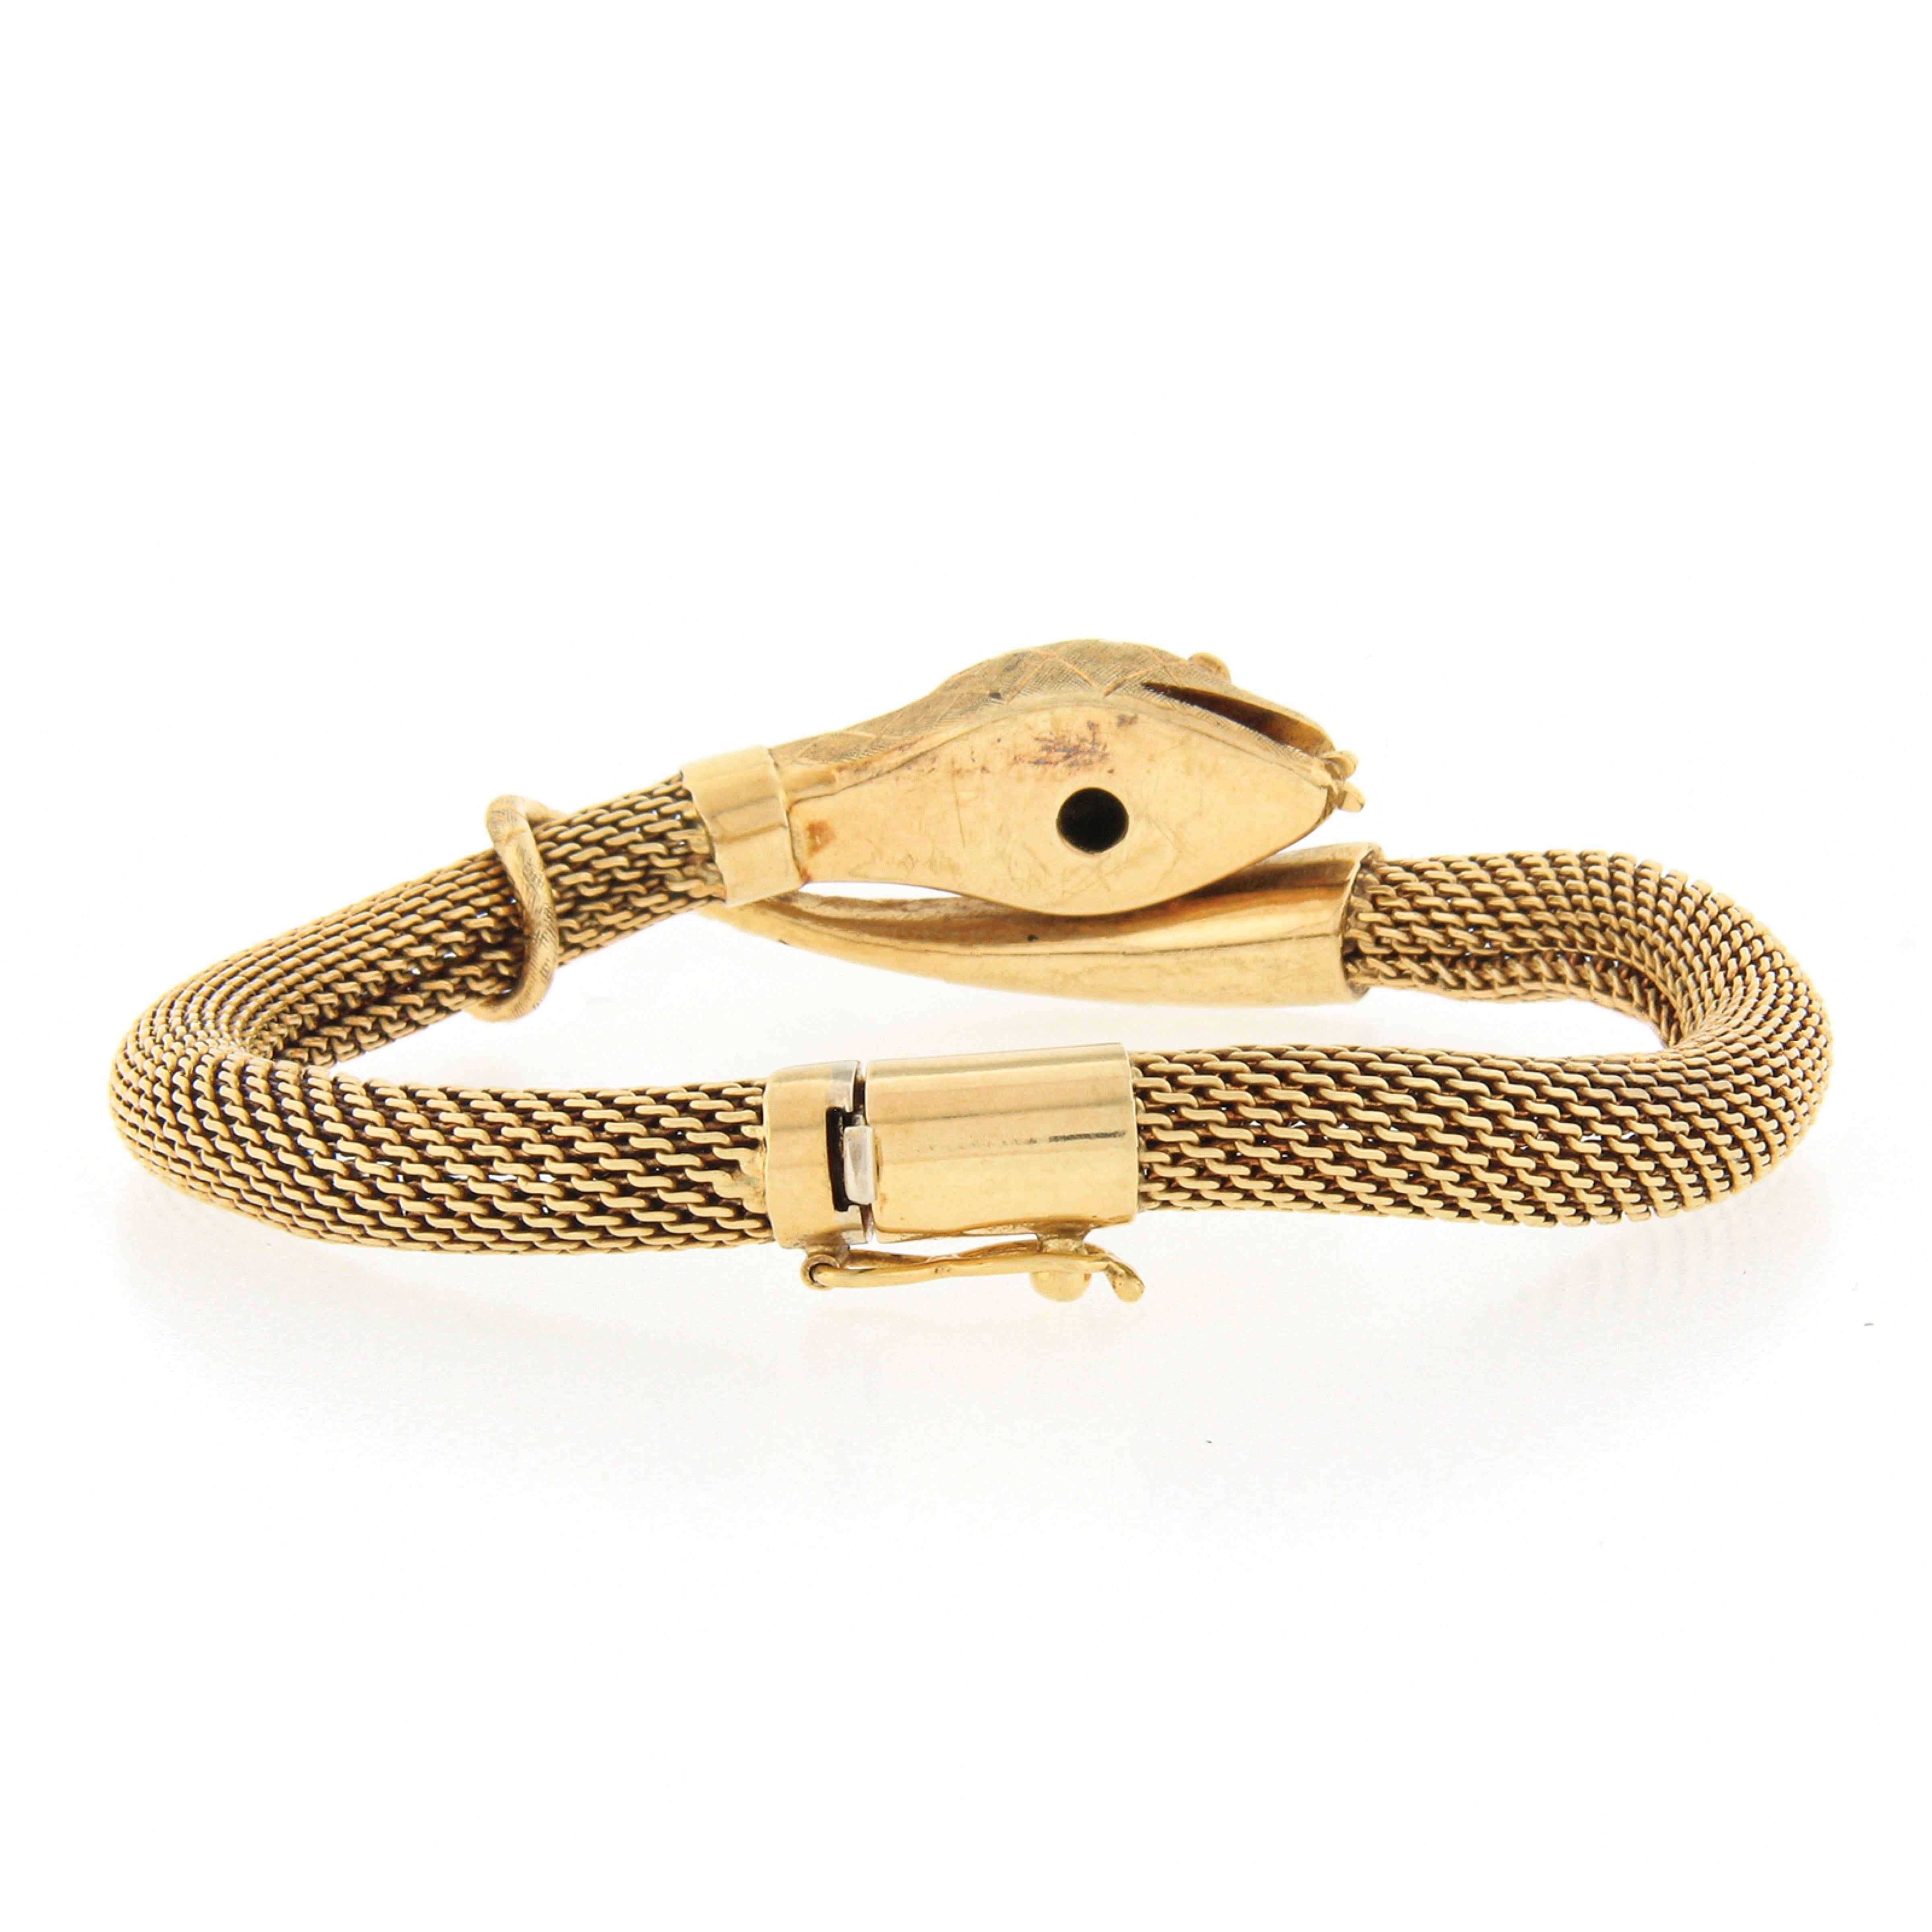 This incredible vintage tube mesh bangle bracelet was crafted from solid 18k yellow gold and features a unique style of a snake wrap that's beautifully detailed with wonderful textured finish throughout. The snakes head is neatly bezel set with a